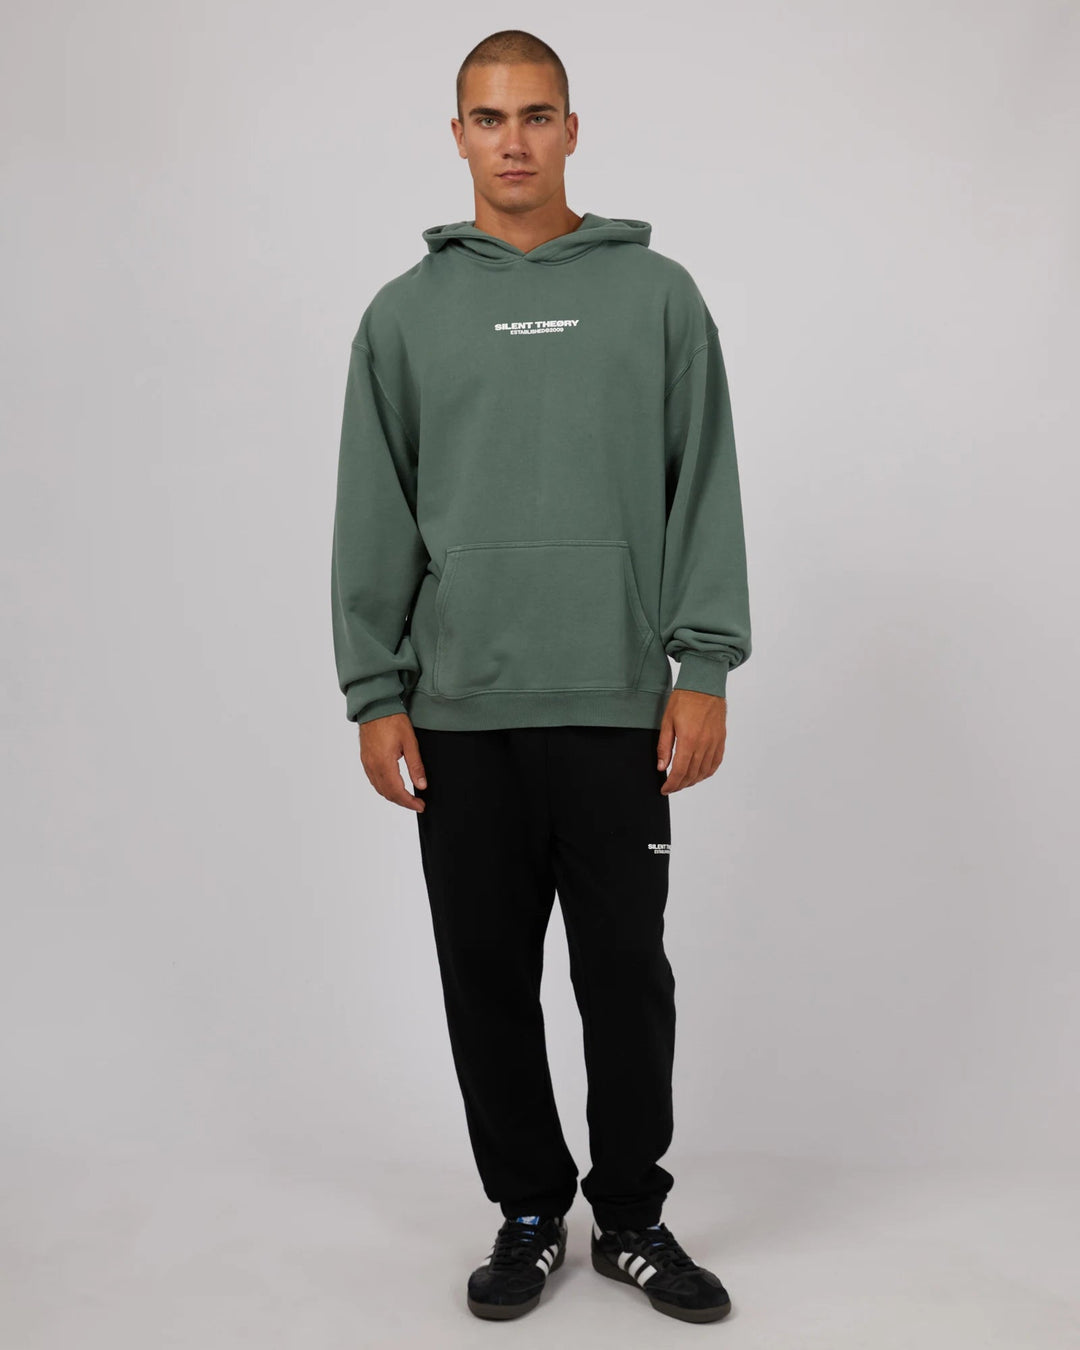 Essential Theory Hoody - Green - Chillis & More NZ